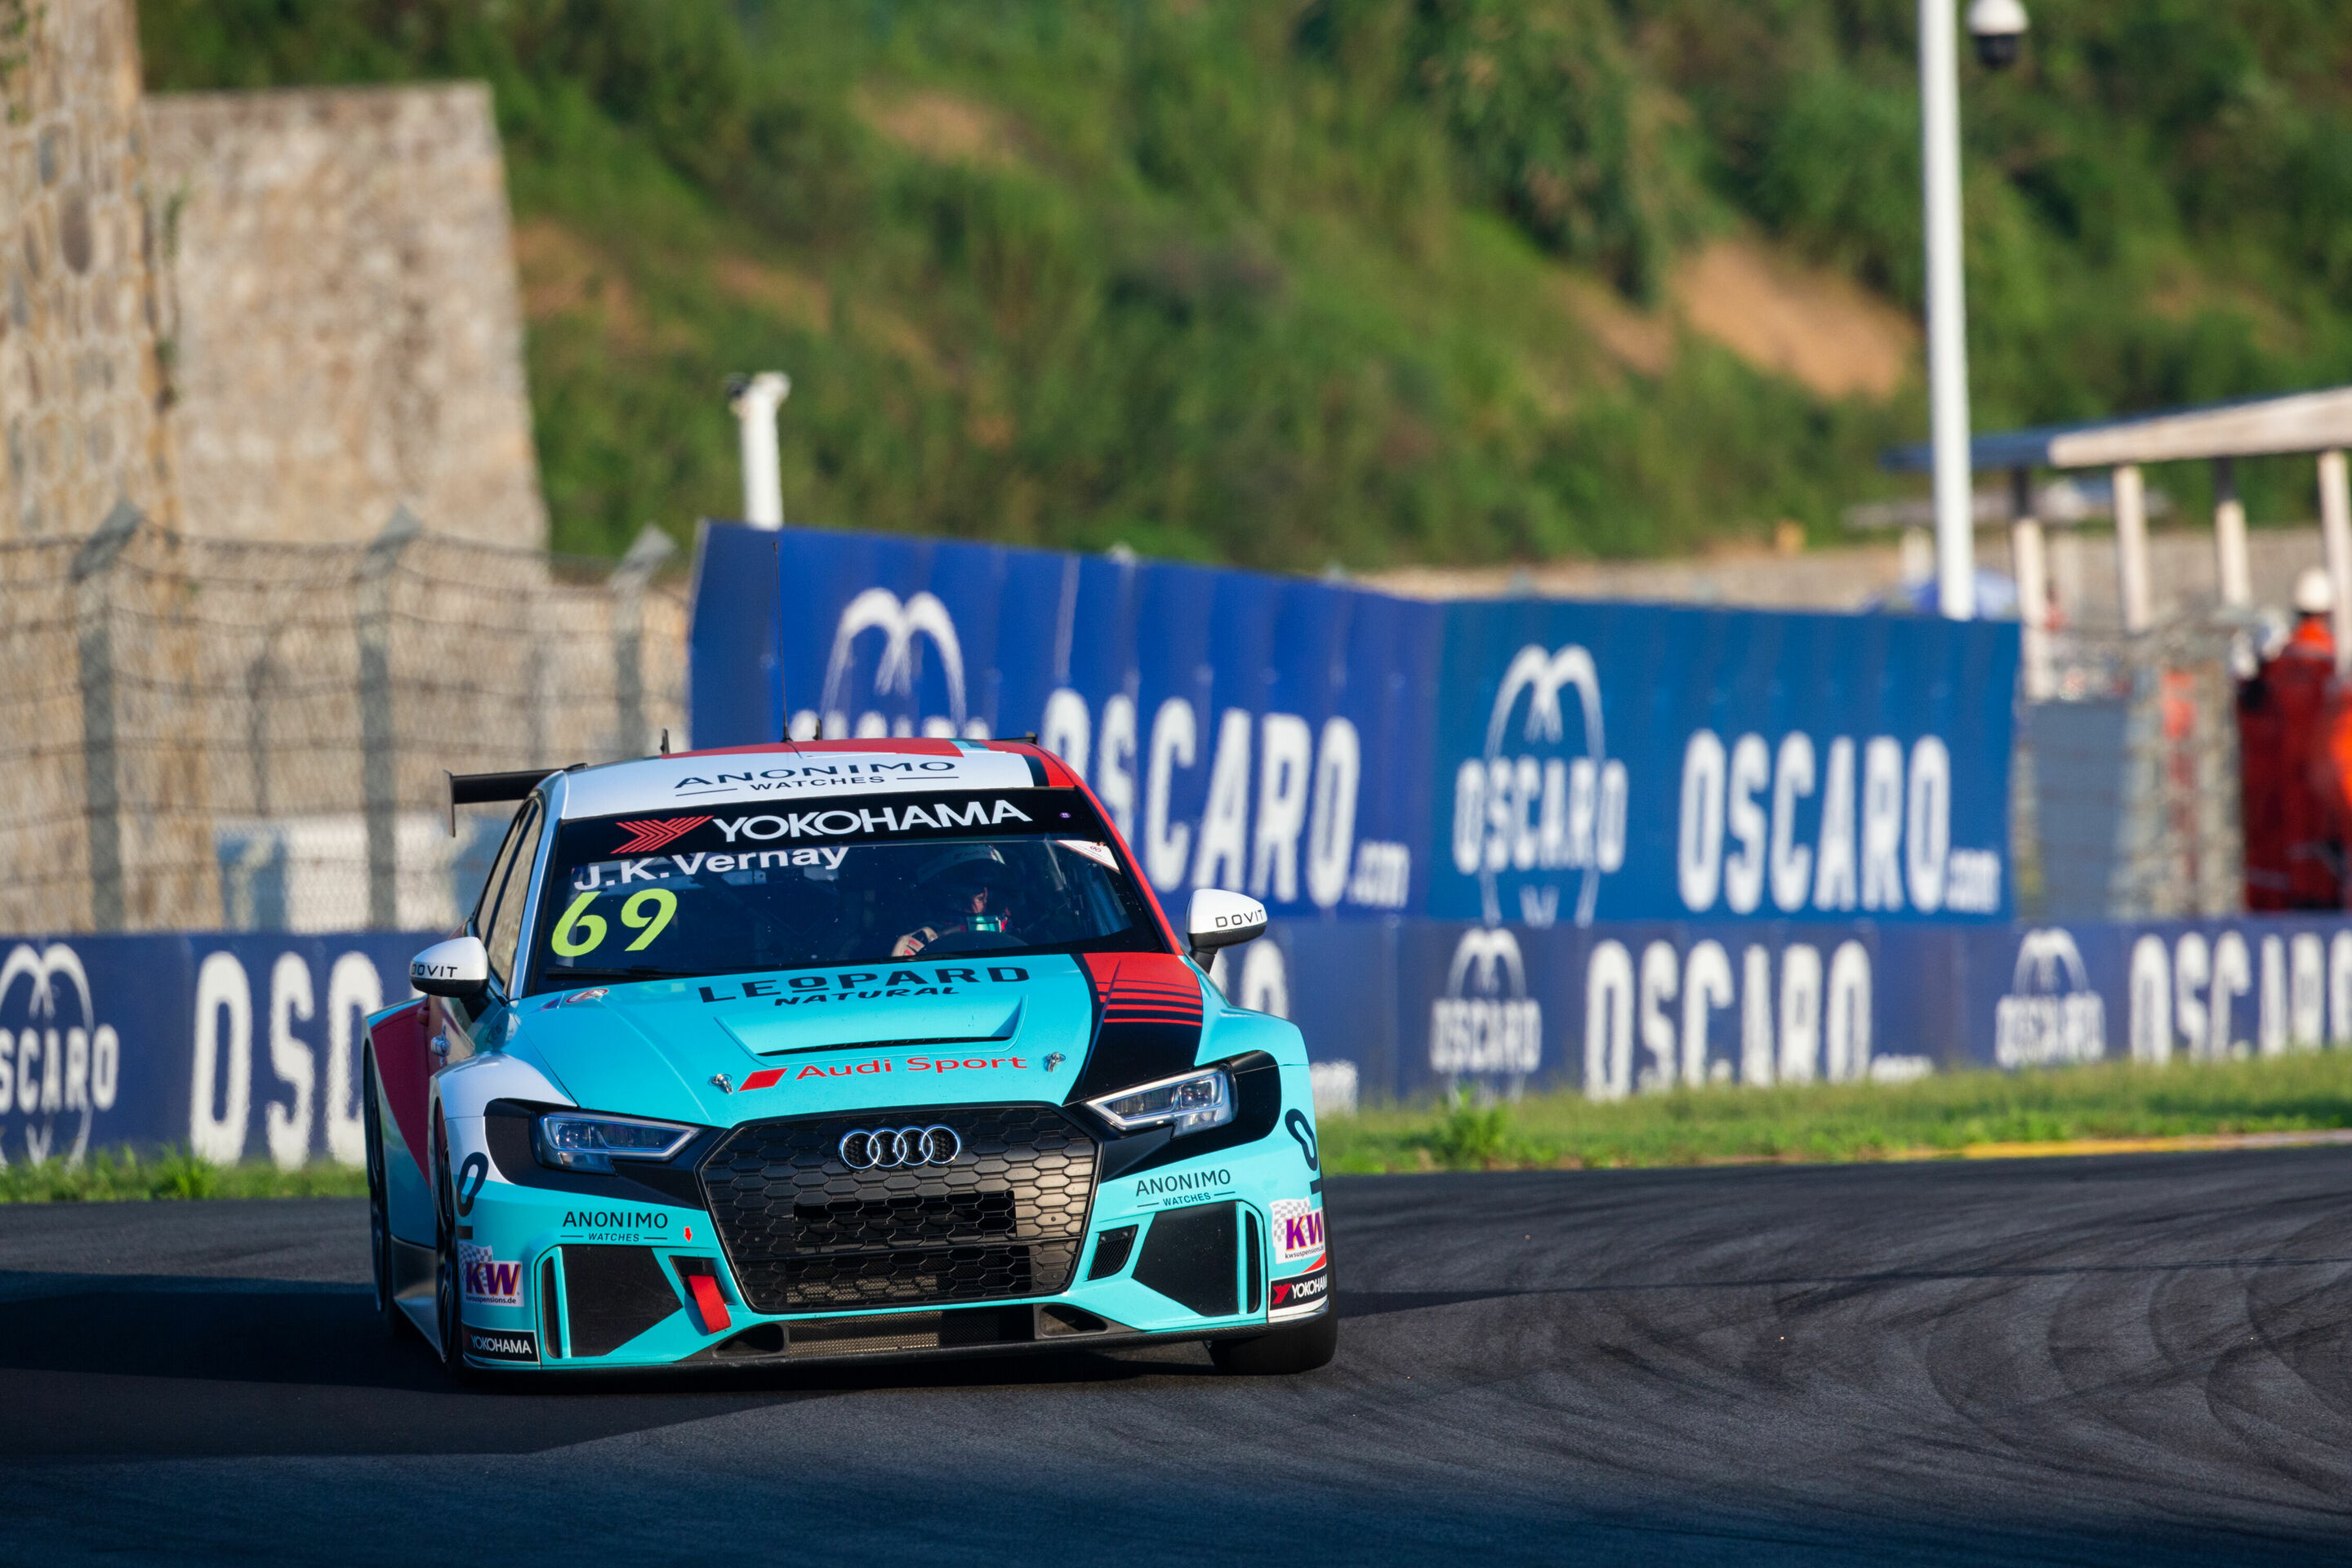 WTCR – FIA World Touring Car Cup 2019